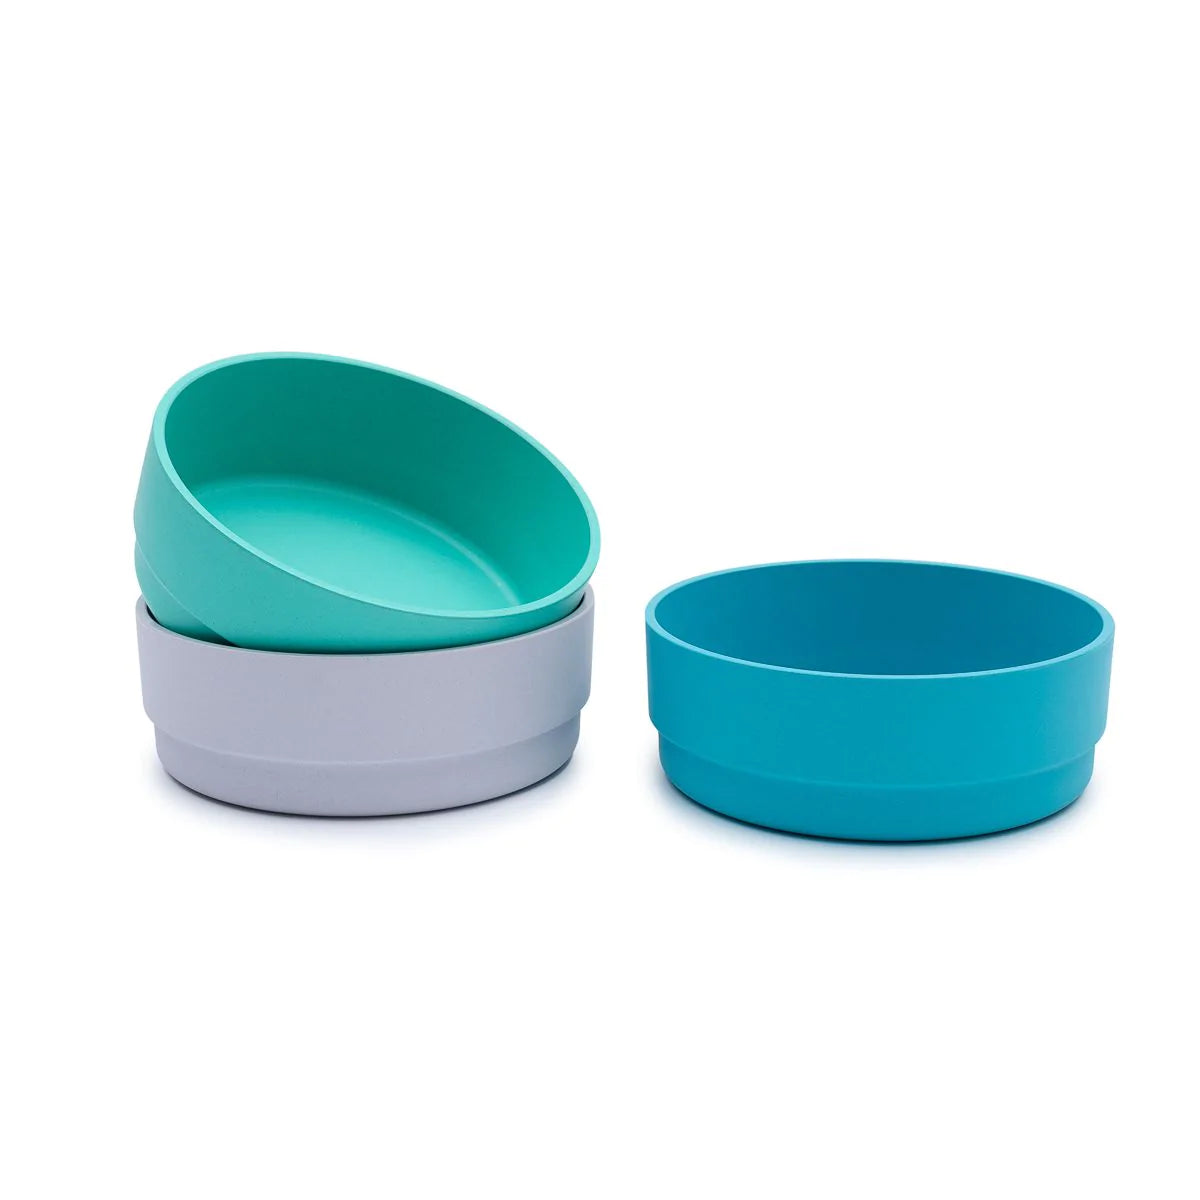 Plant-Based 3 Pack of Bowls - Lagoon (600ml)